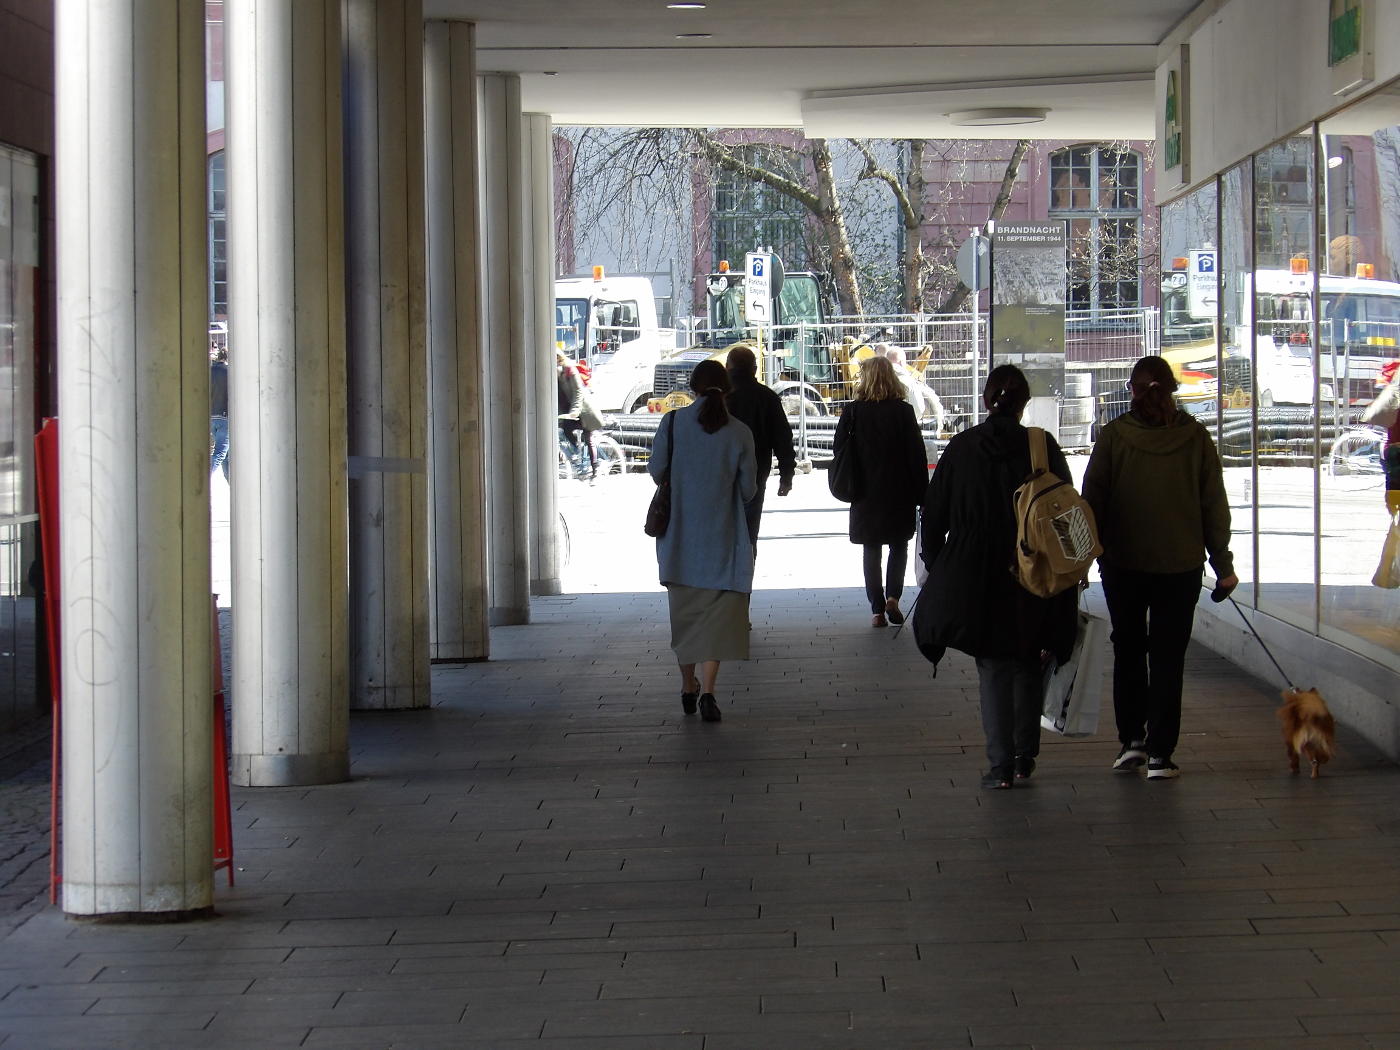 Darmstadt, the City of Mixed Population – Jehovah's Witnesses work on it internationally